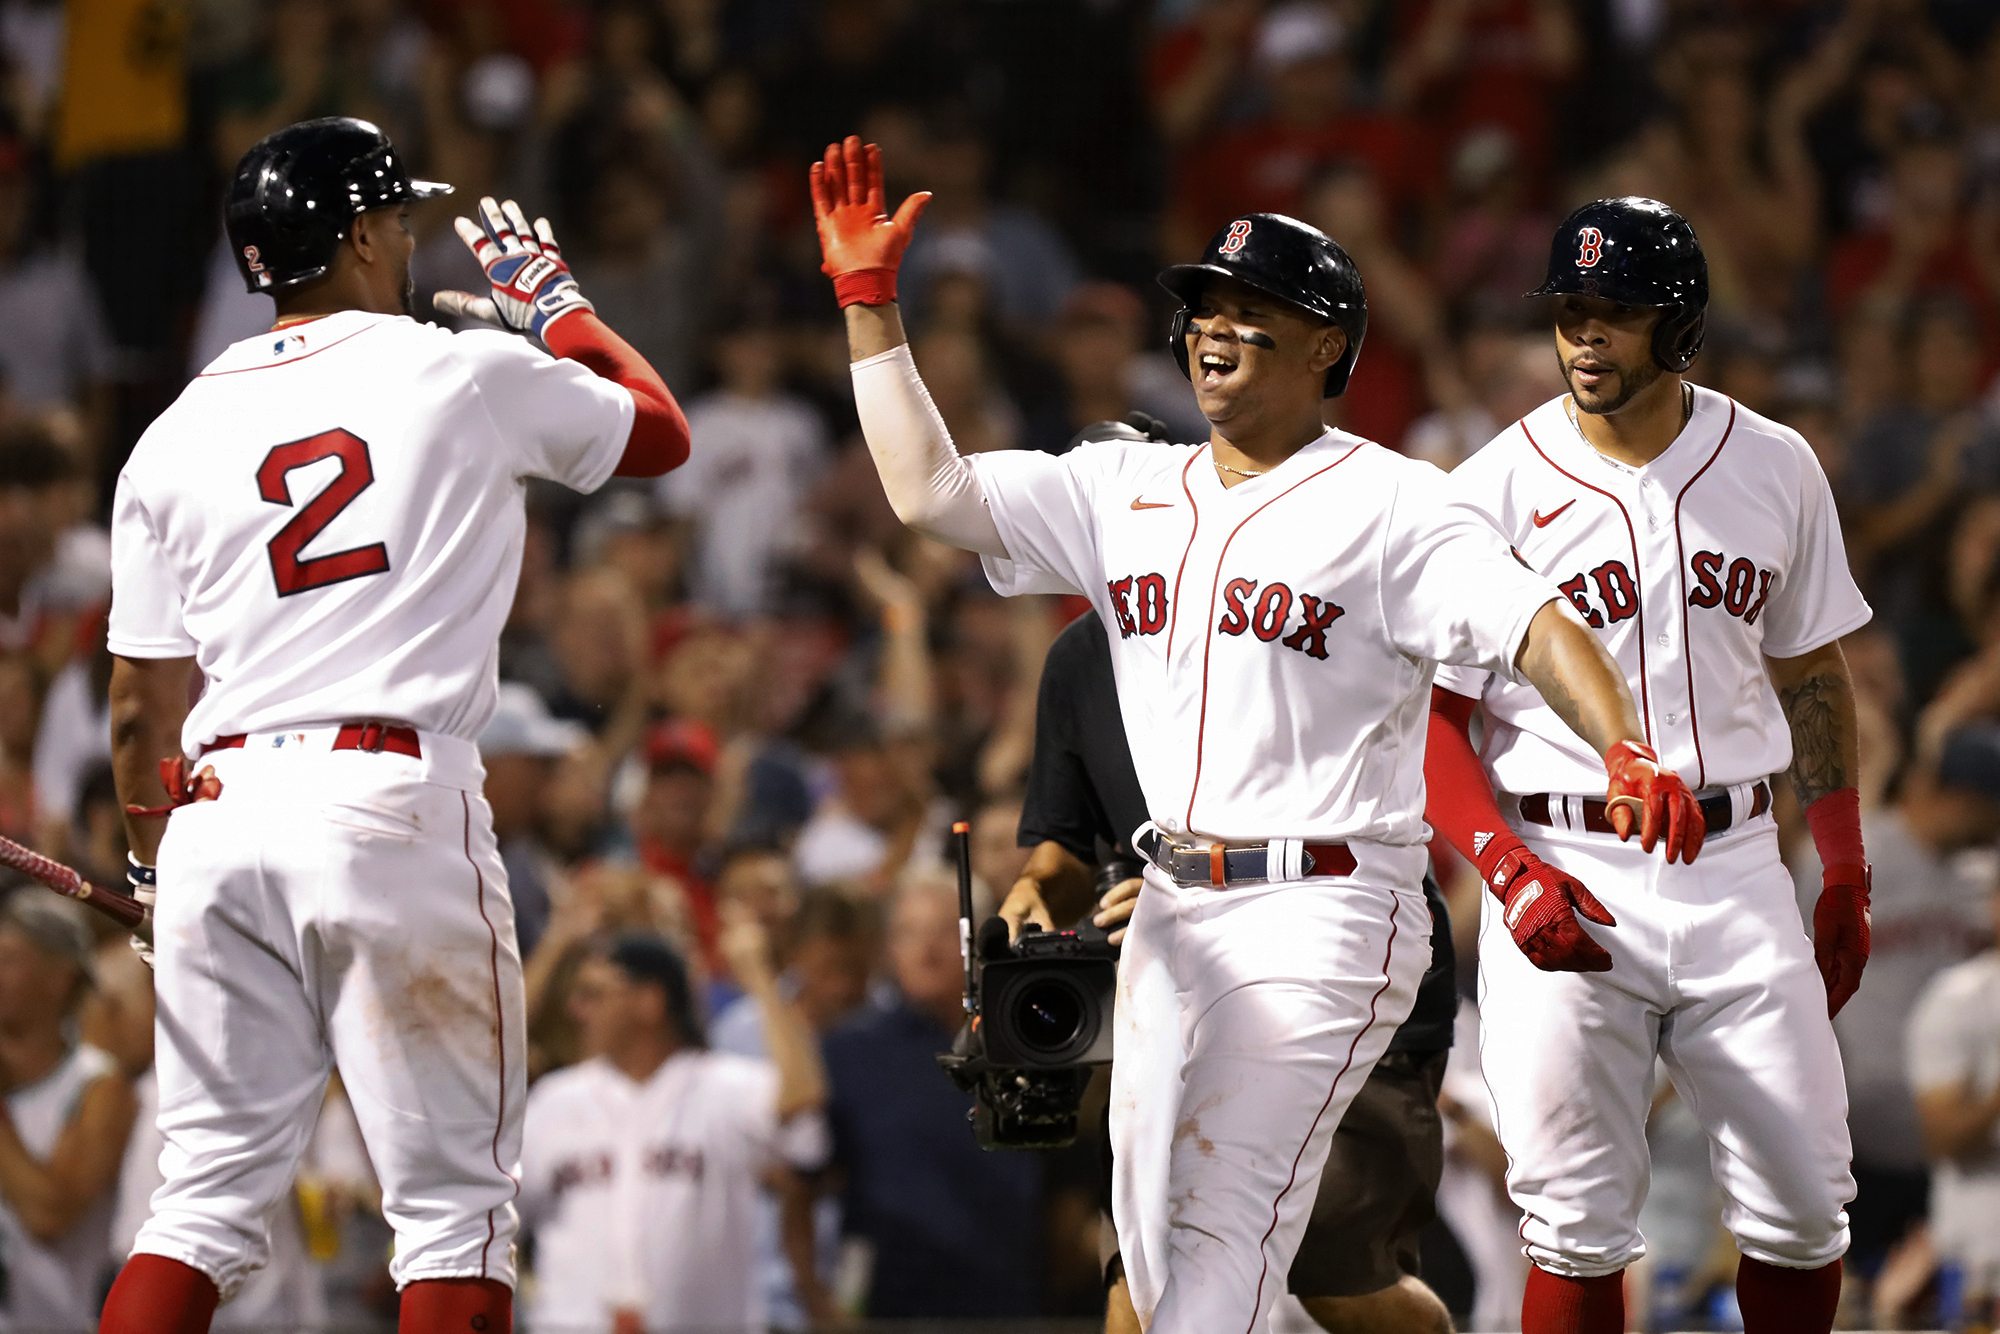 Boston Red Sox New York Yankees: A back breaker at Fenway - Over